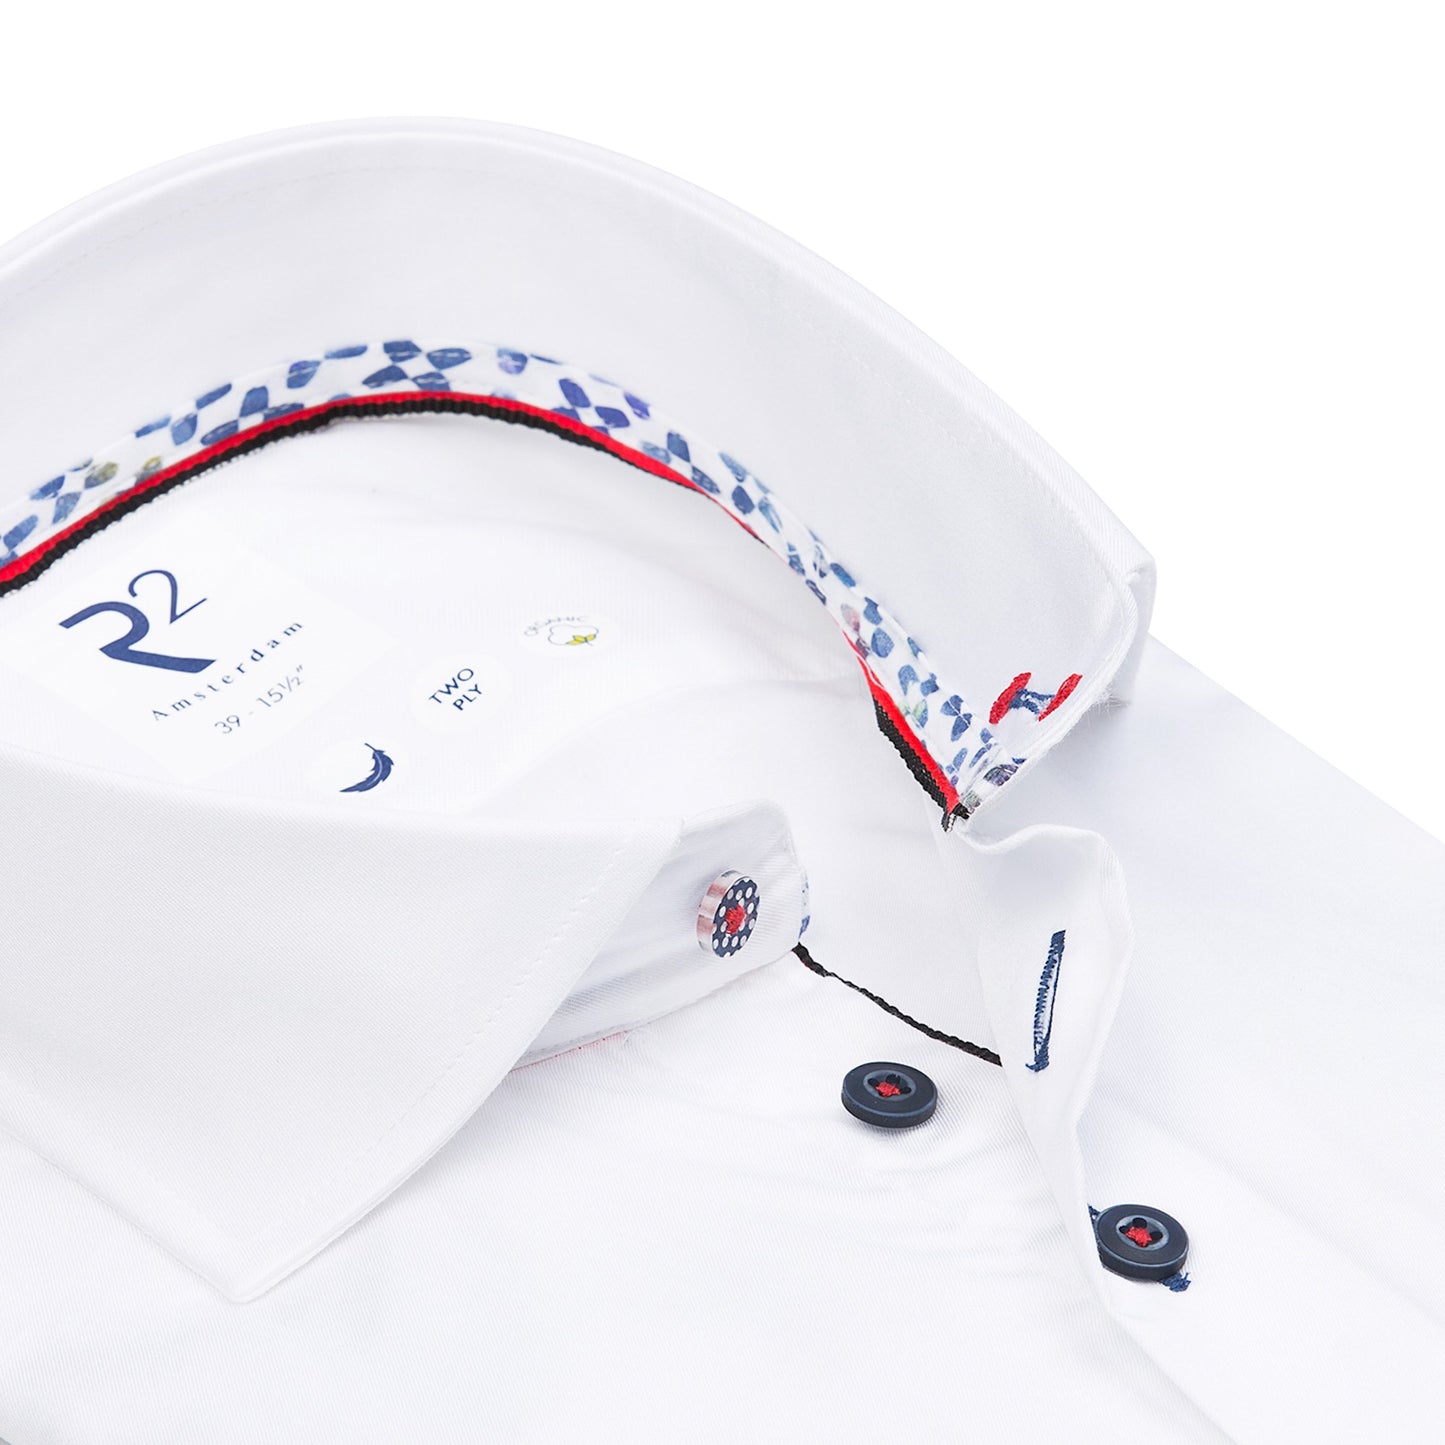 R2 Amsterdam Pattern Shirt - White / Contrast Cuff and Buttons